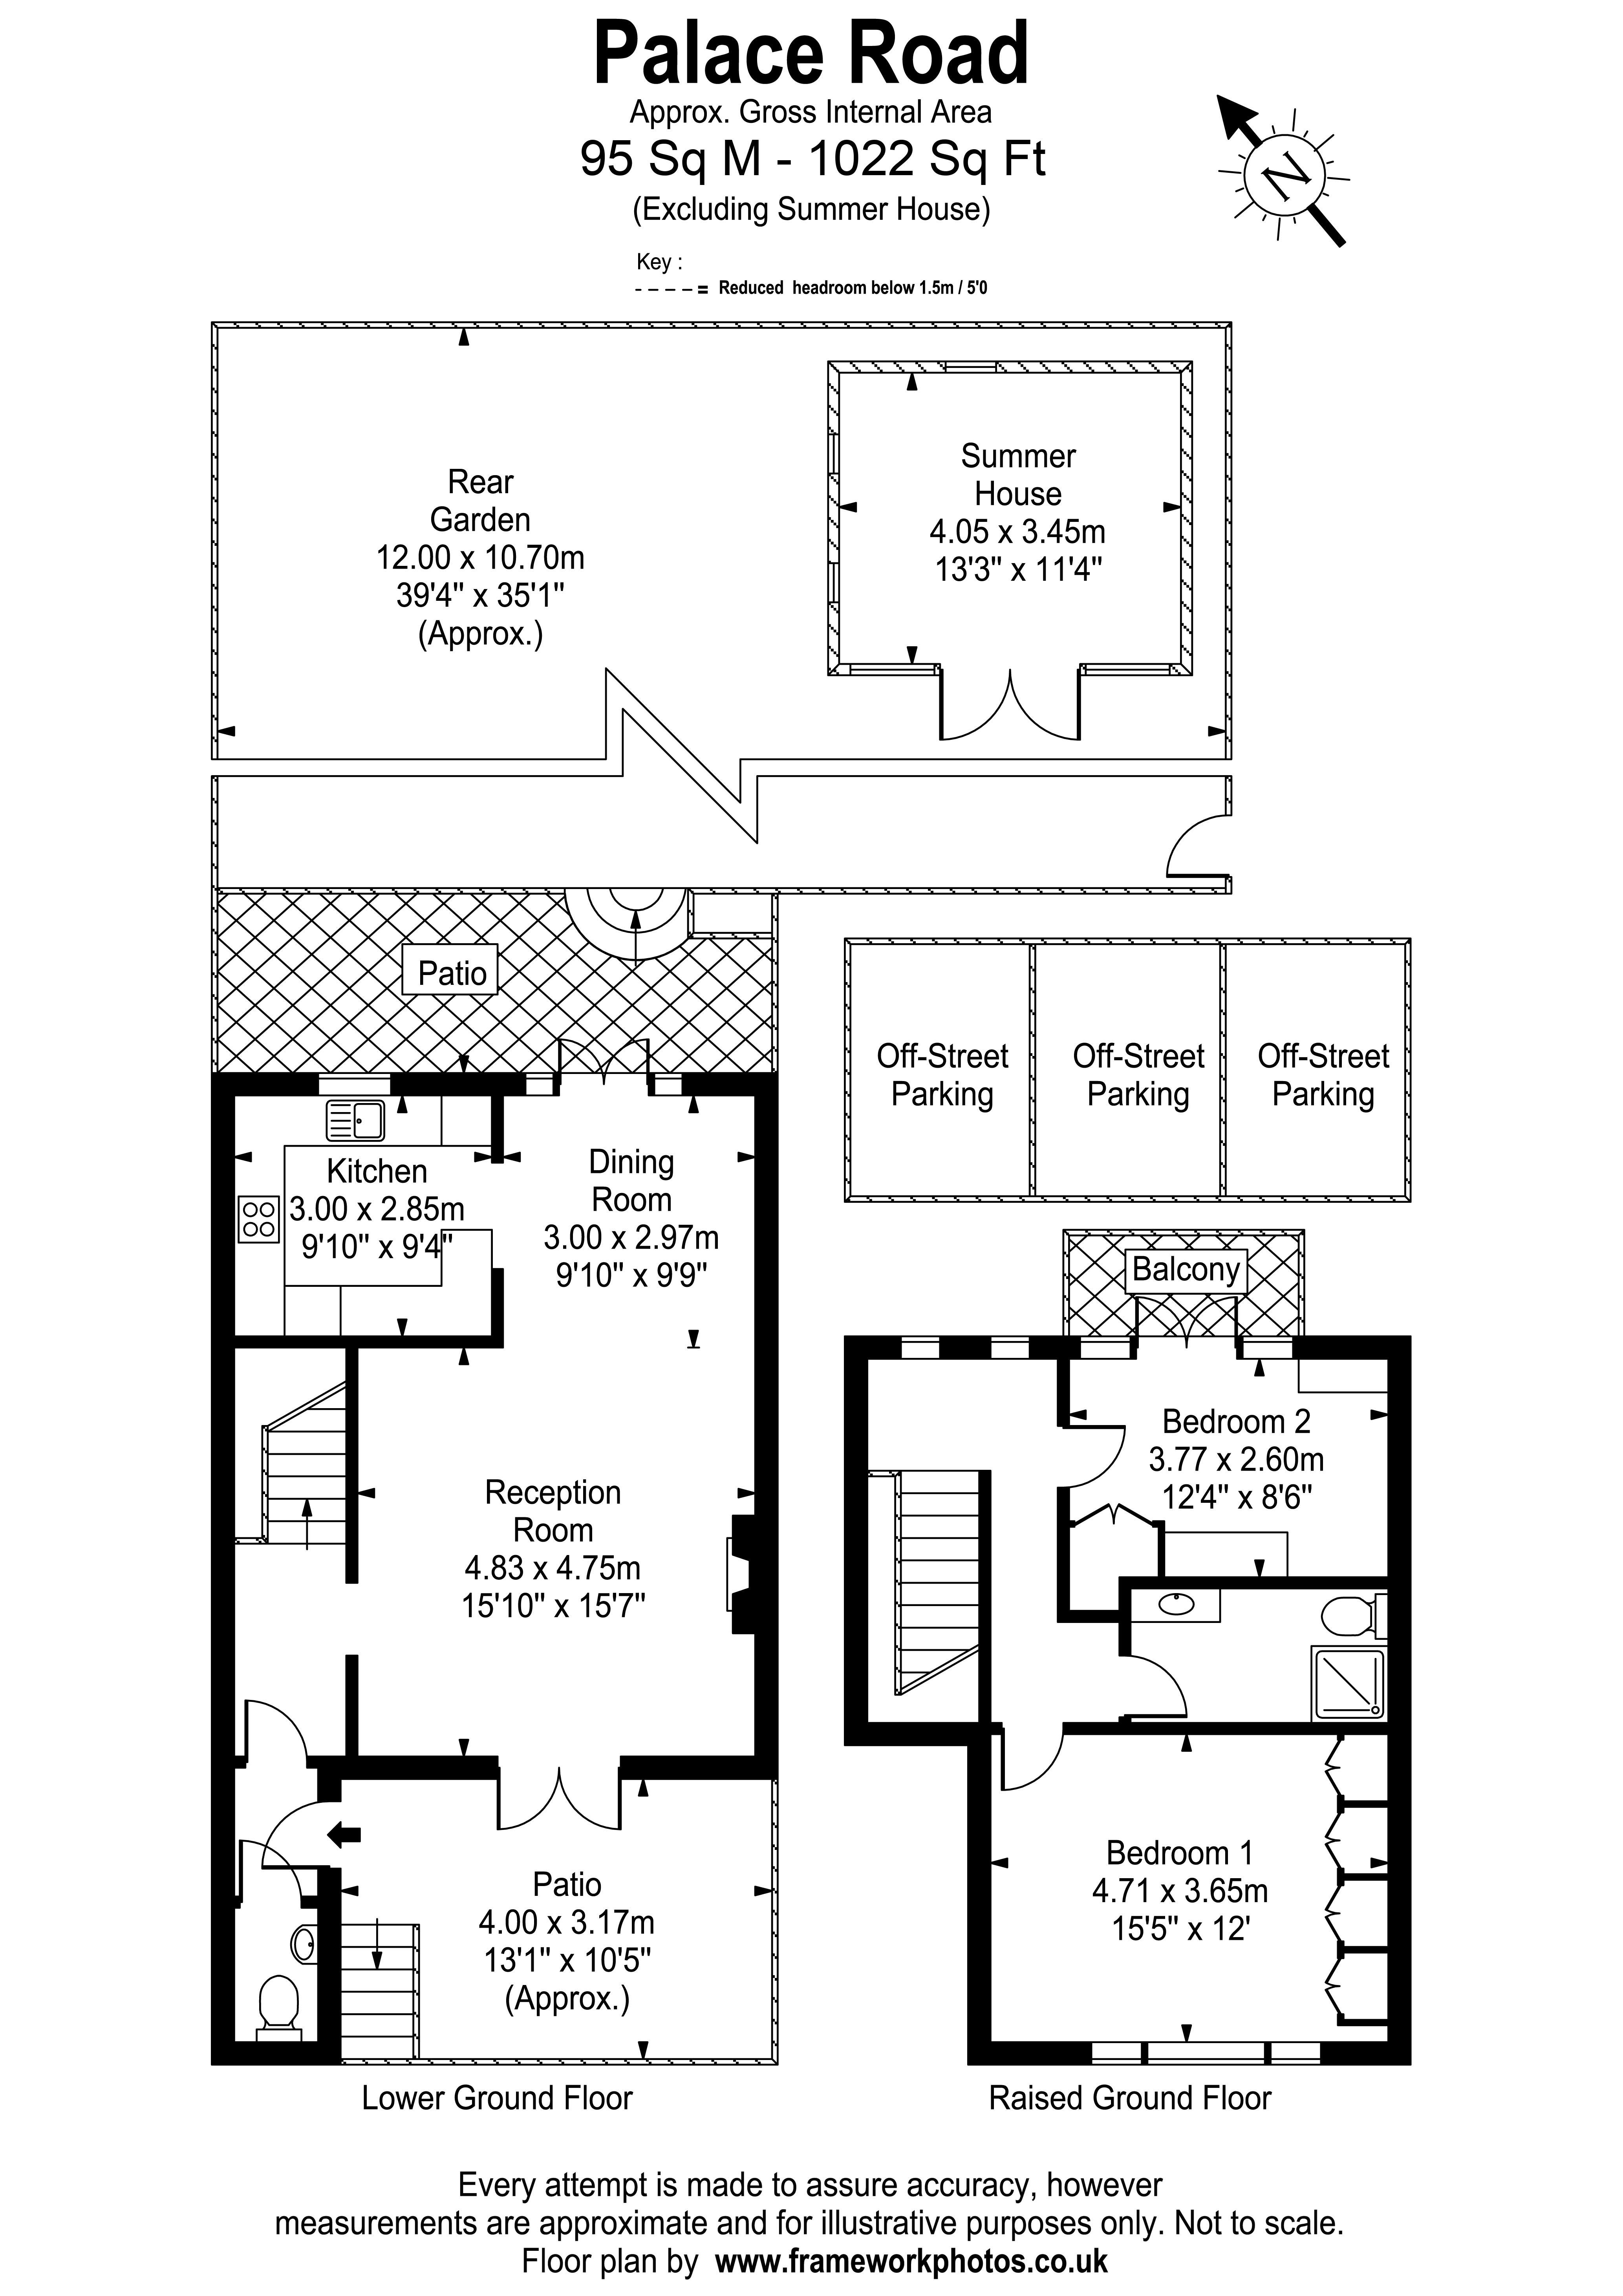 Floorplans For 35 Palace Road, East Molesey